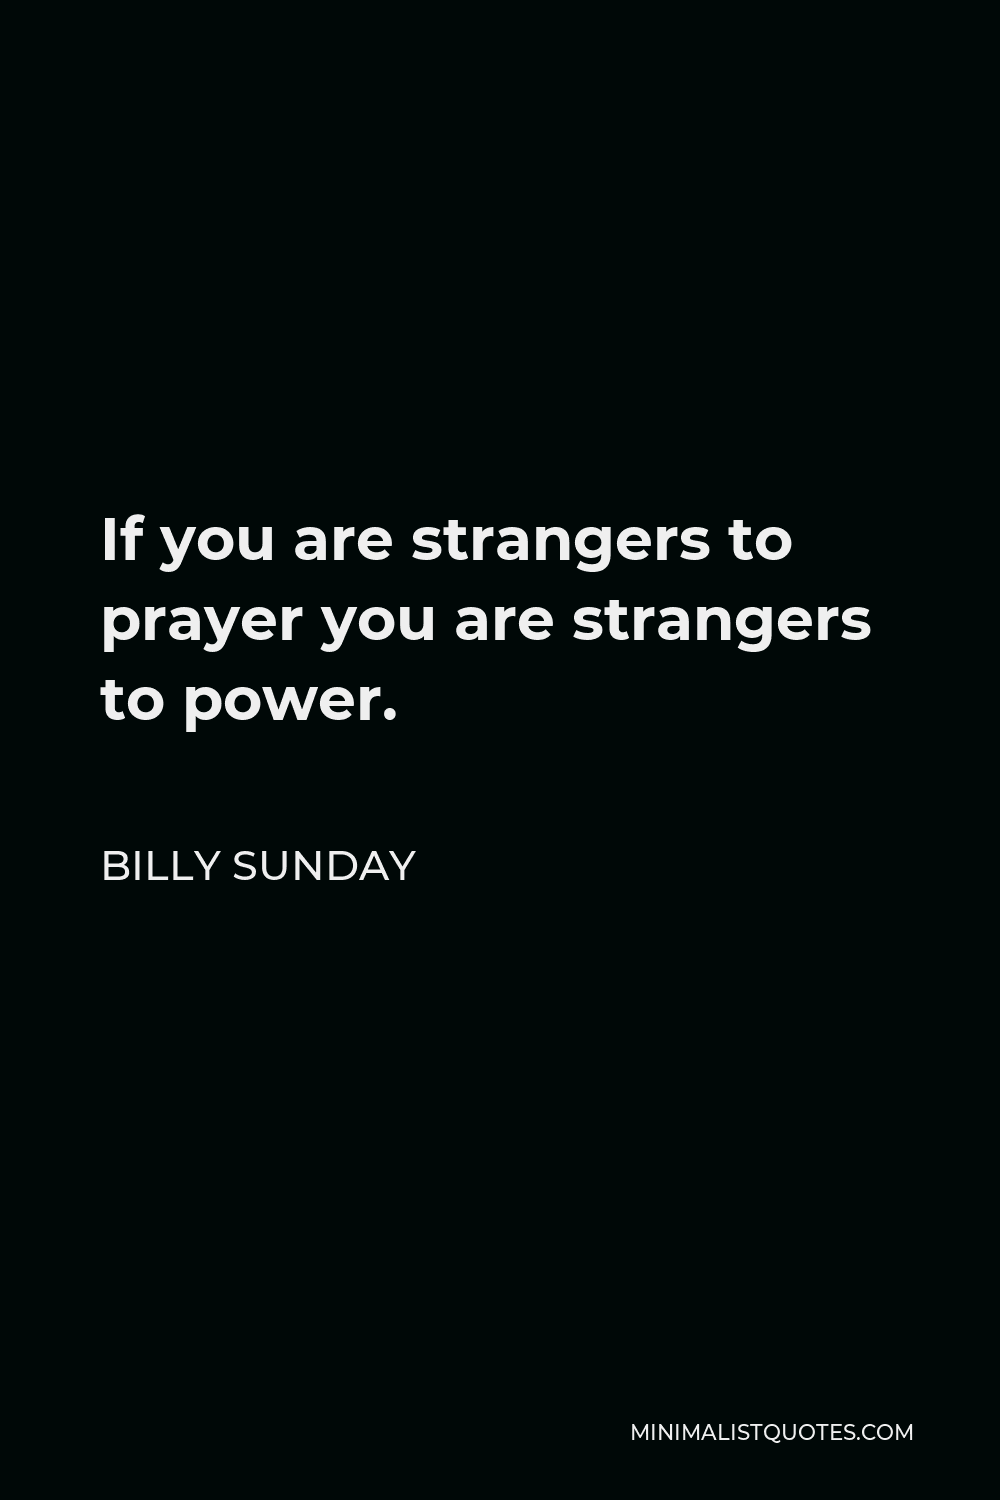 Billy Sunday Quote - If you are strangers to prayer you are strangers to power.